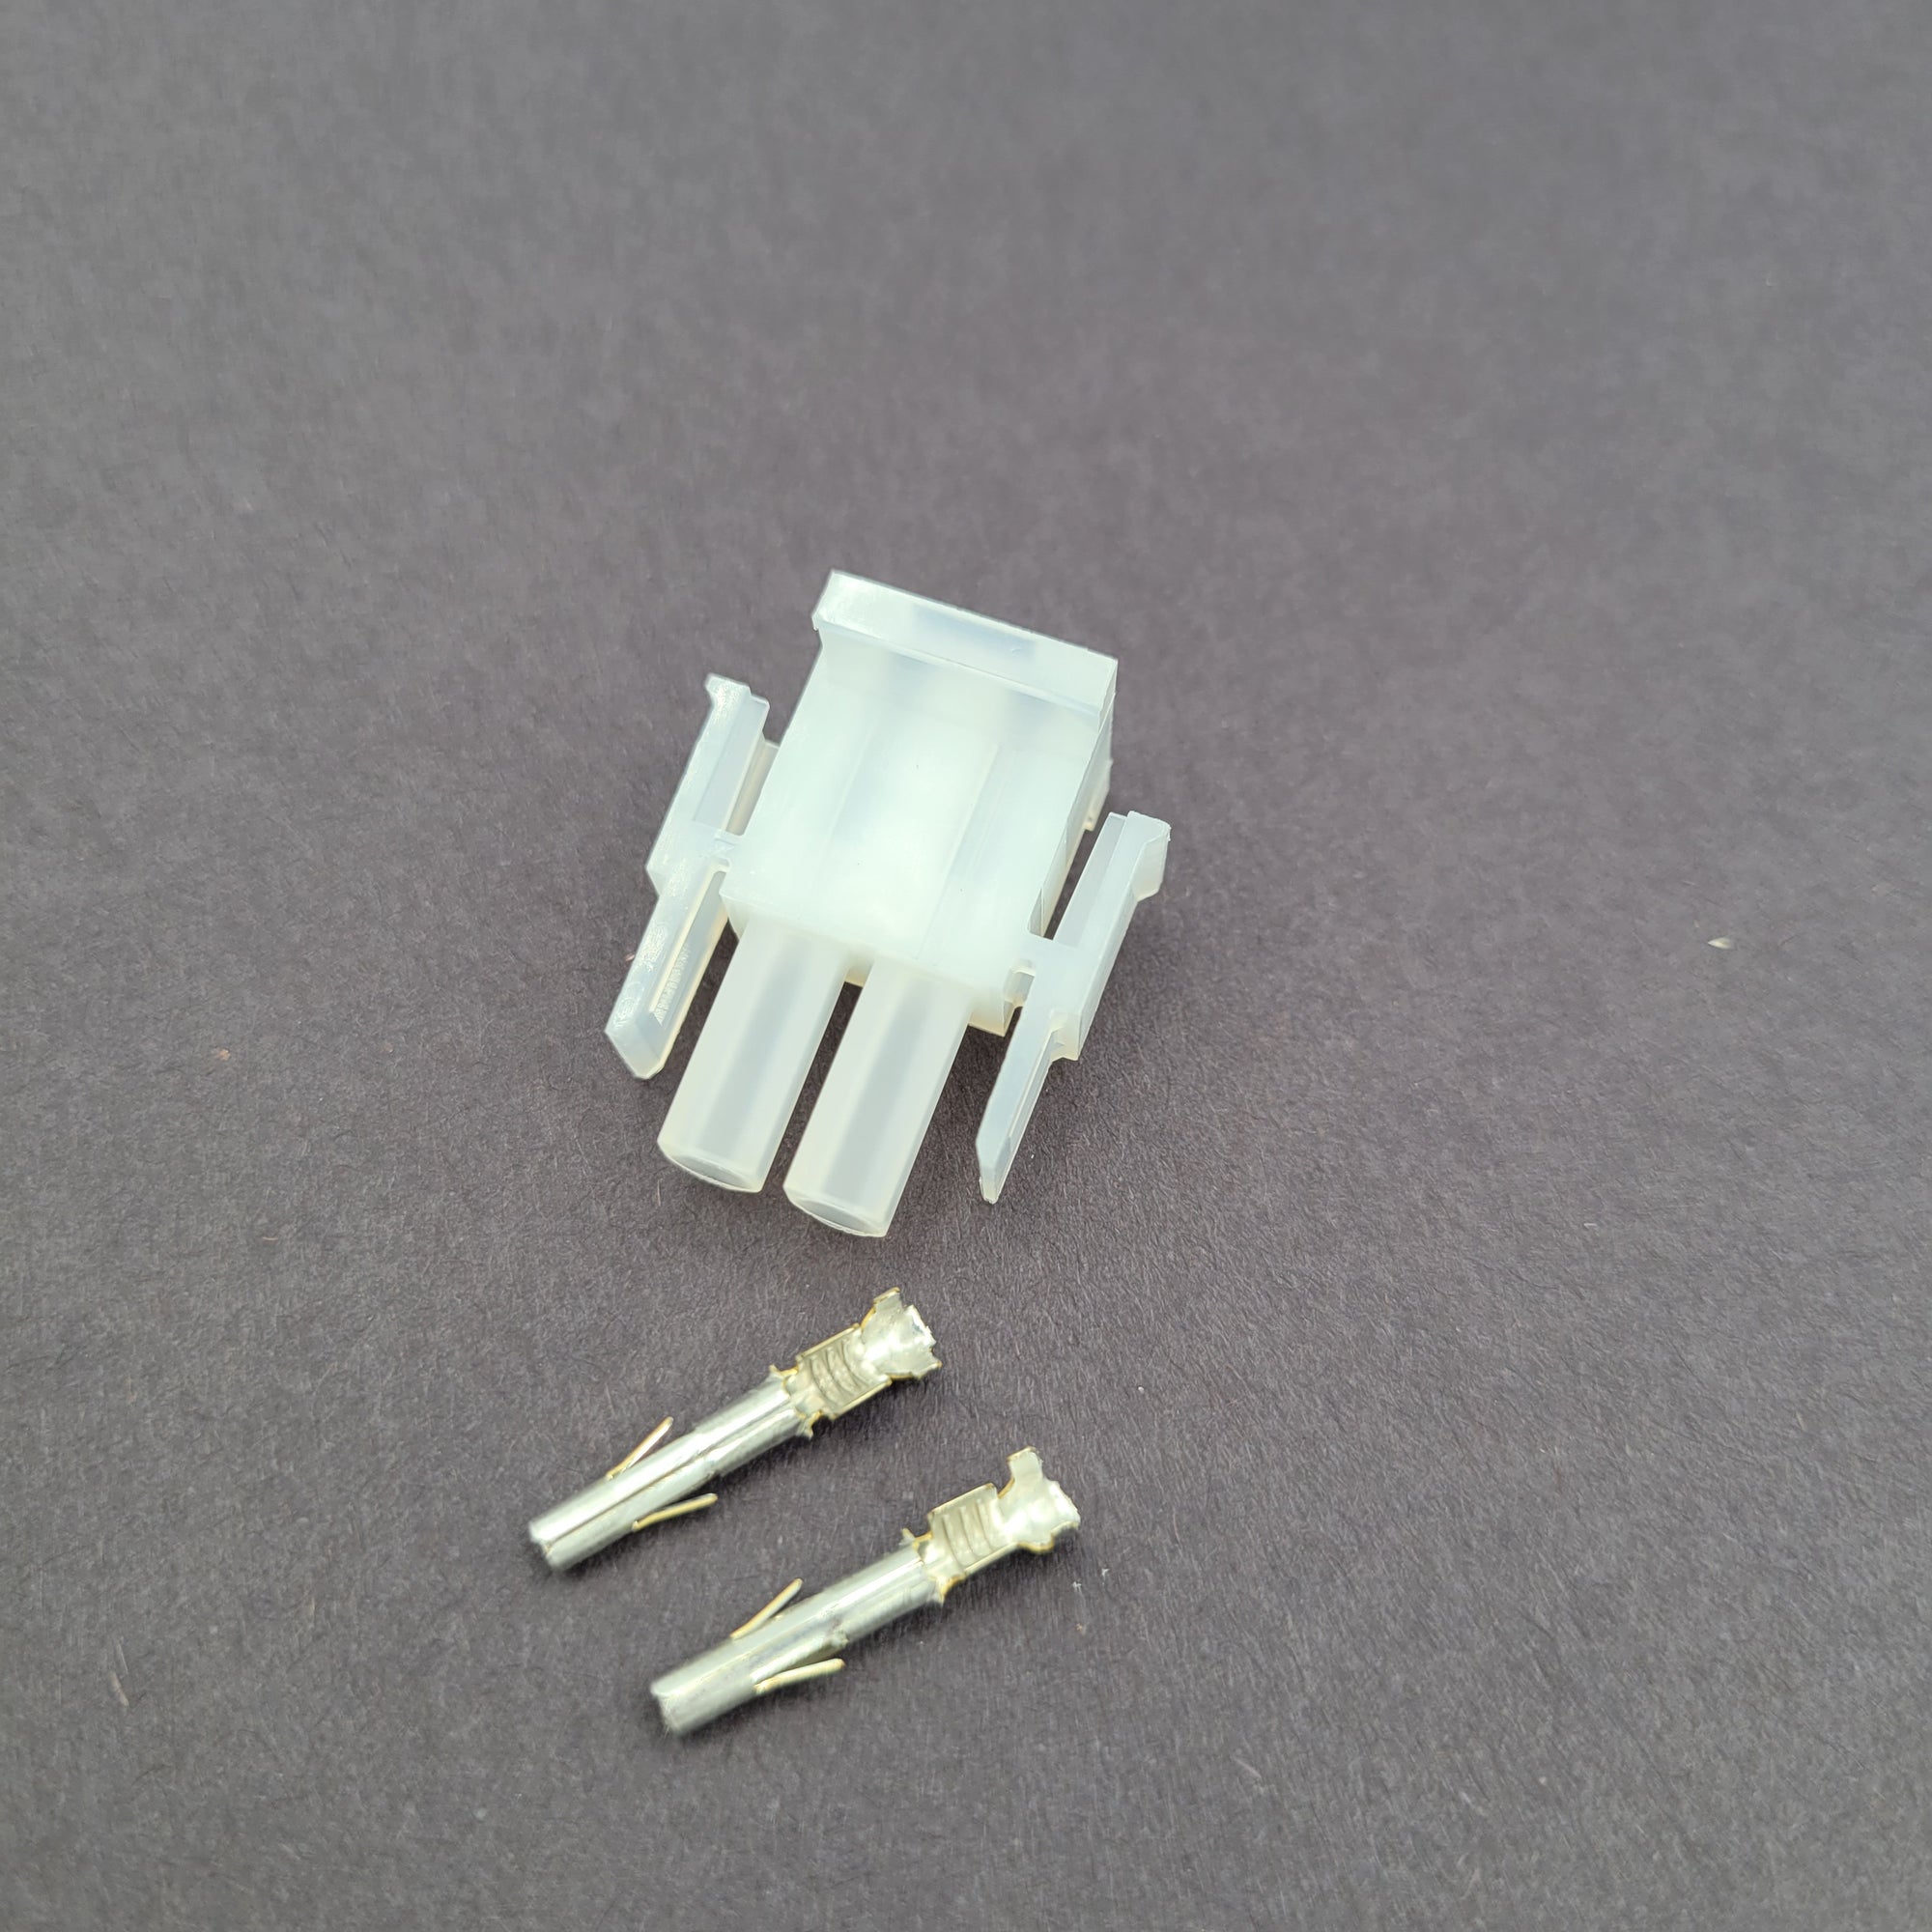 Molex 2 pin - for Pioneer 700/1000 switch panel.